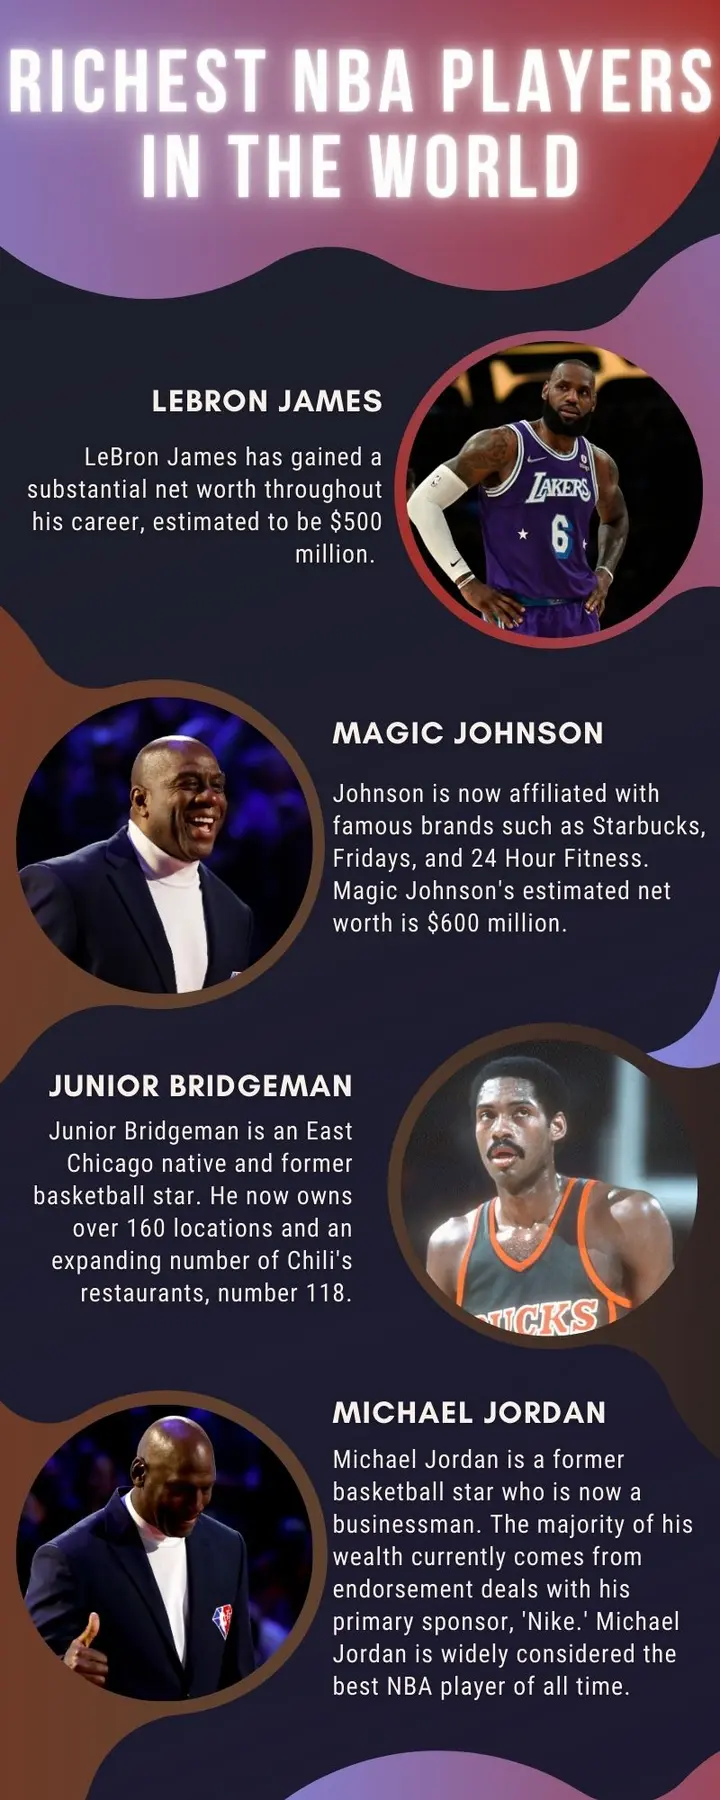 Longest contract in NBA history: When Magic Johnson signed a 25